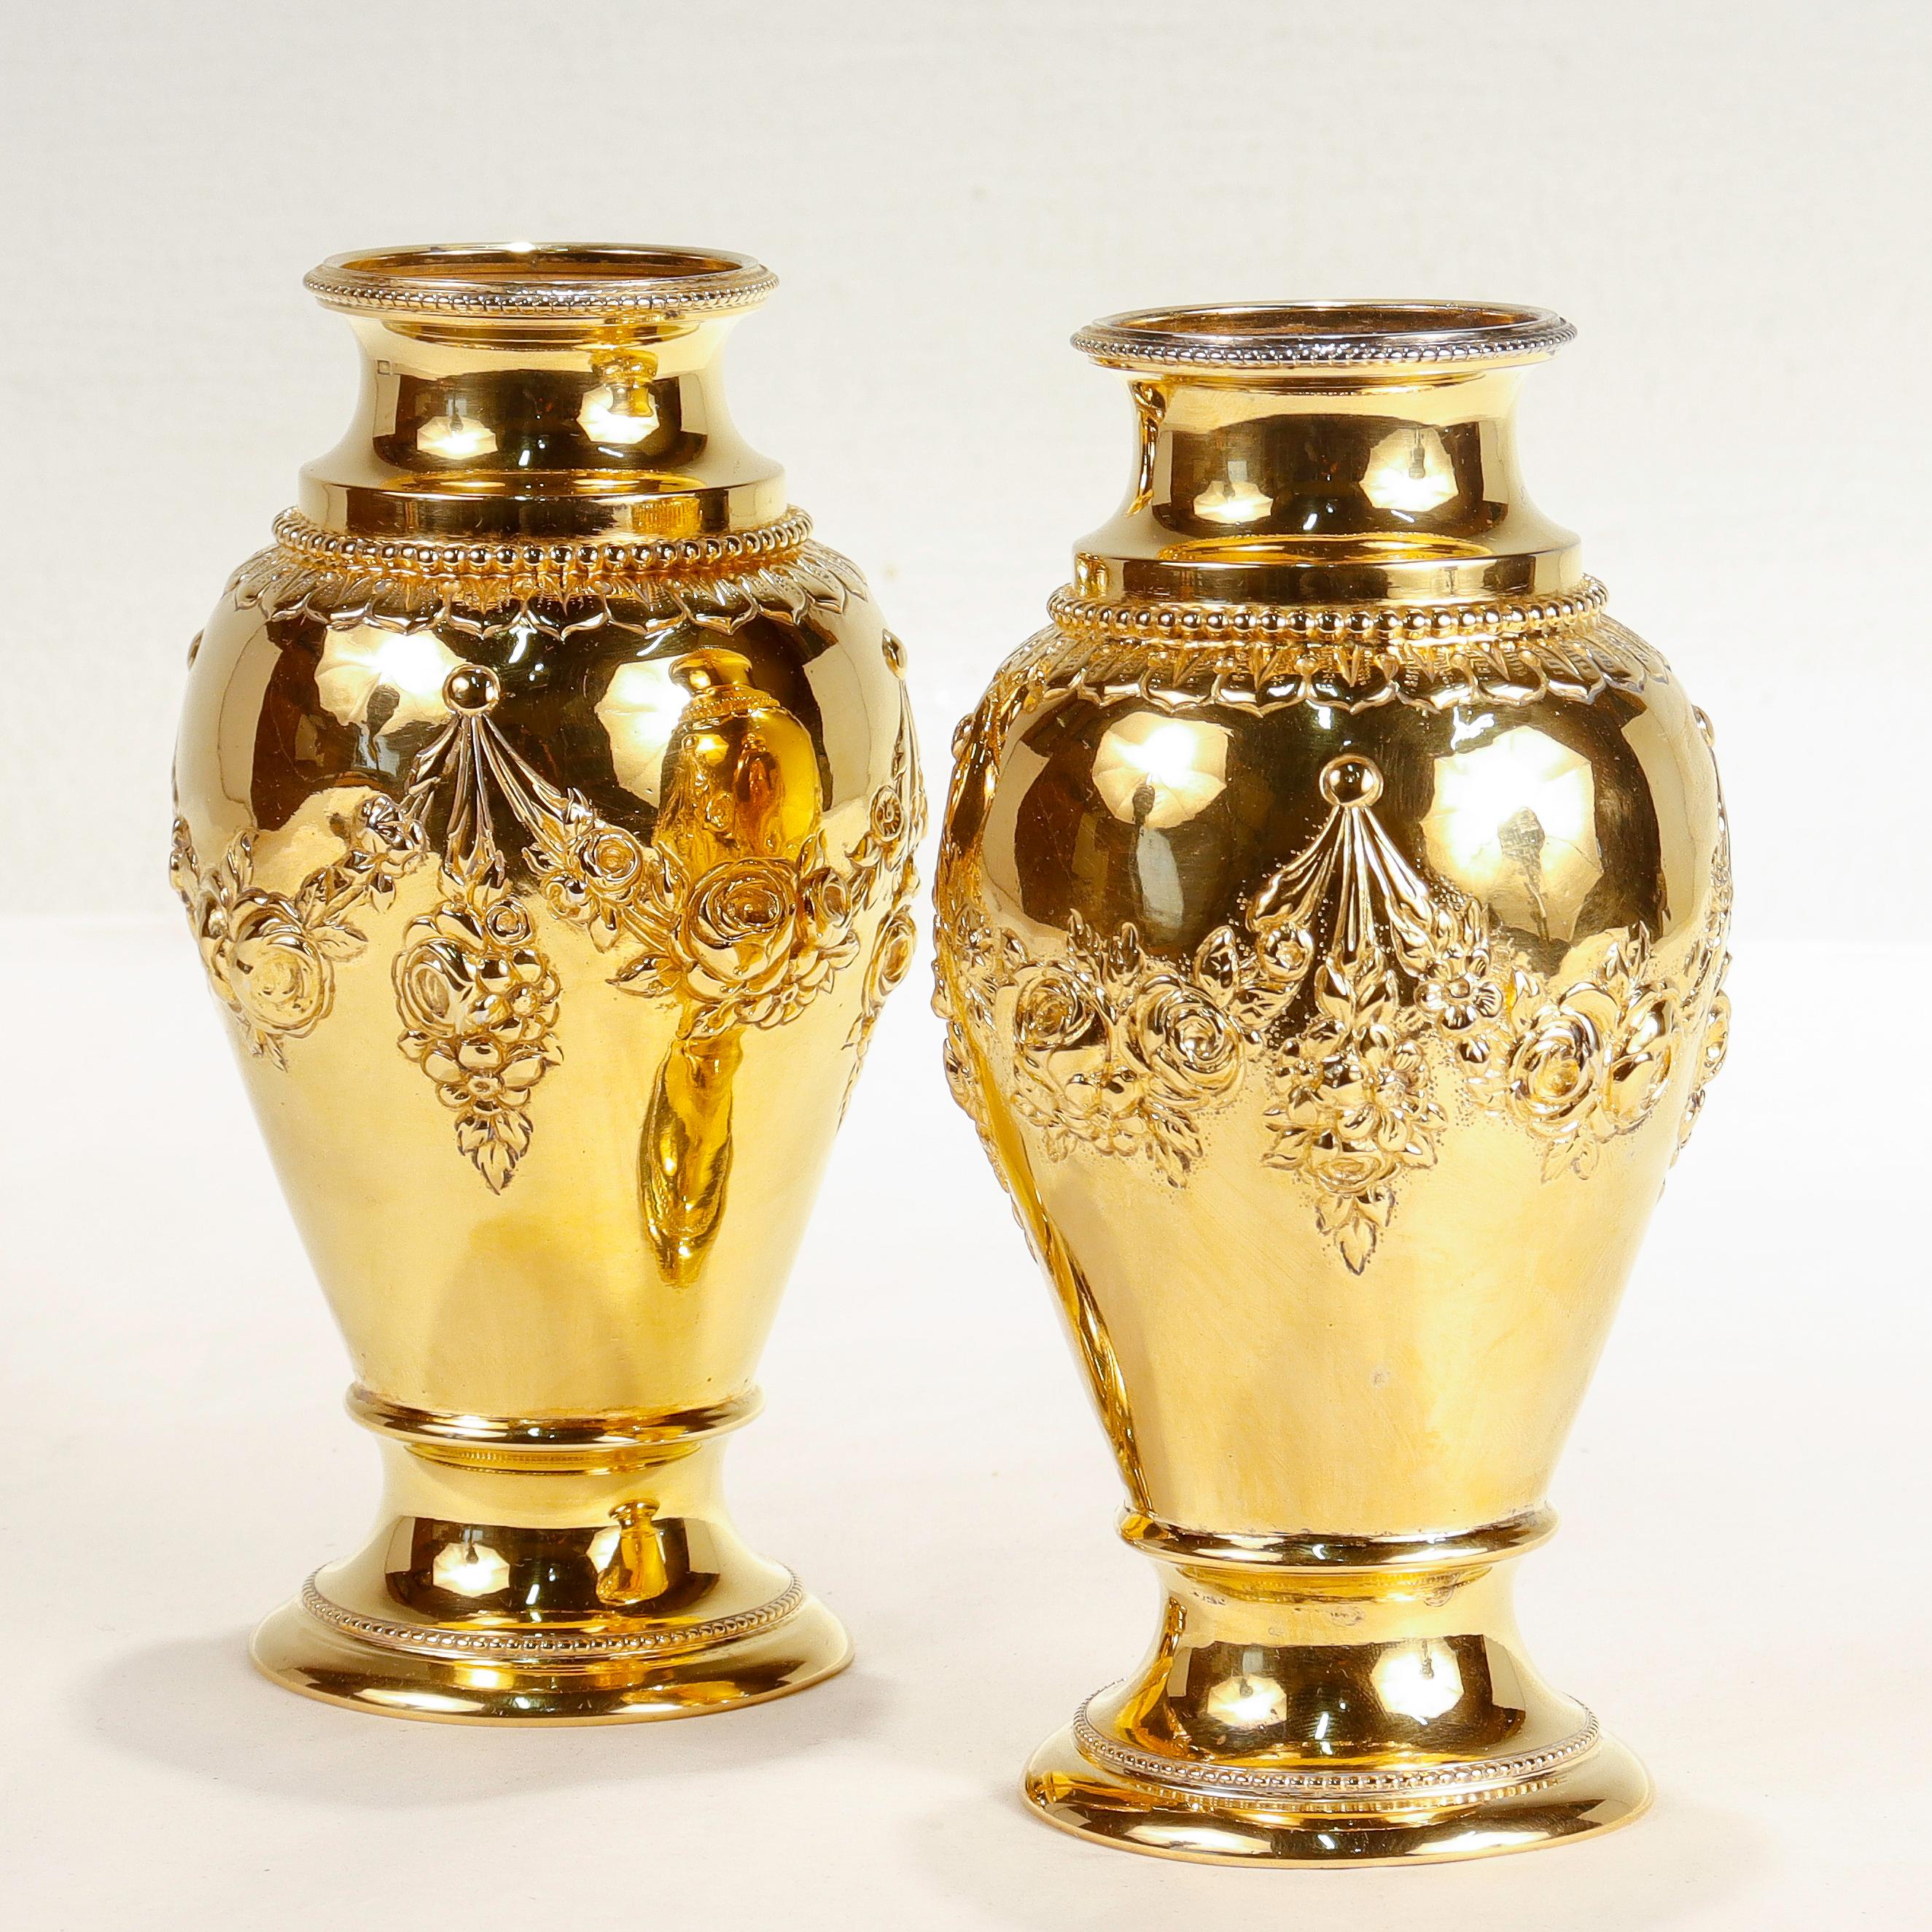 A fine pair of German gilt 800 fine silver vases.

With repousse work to the bodies, beaded collar and mouth, a flared stepped foot, and gilding throughout.

By J. Kurz and Co. of Hanau, Germany.

Marked with pseudo-Hanau hallmarks to the